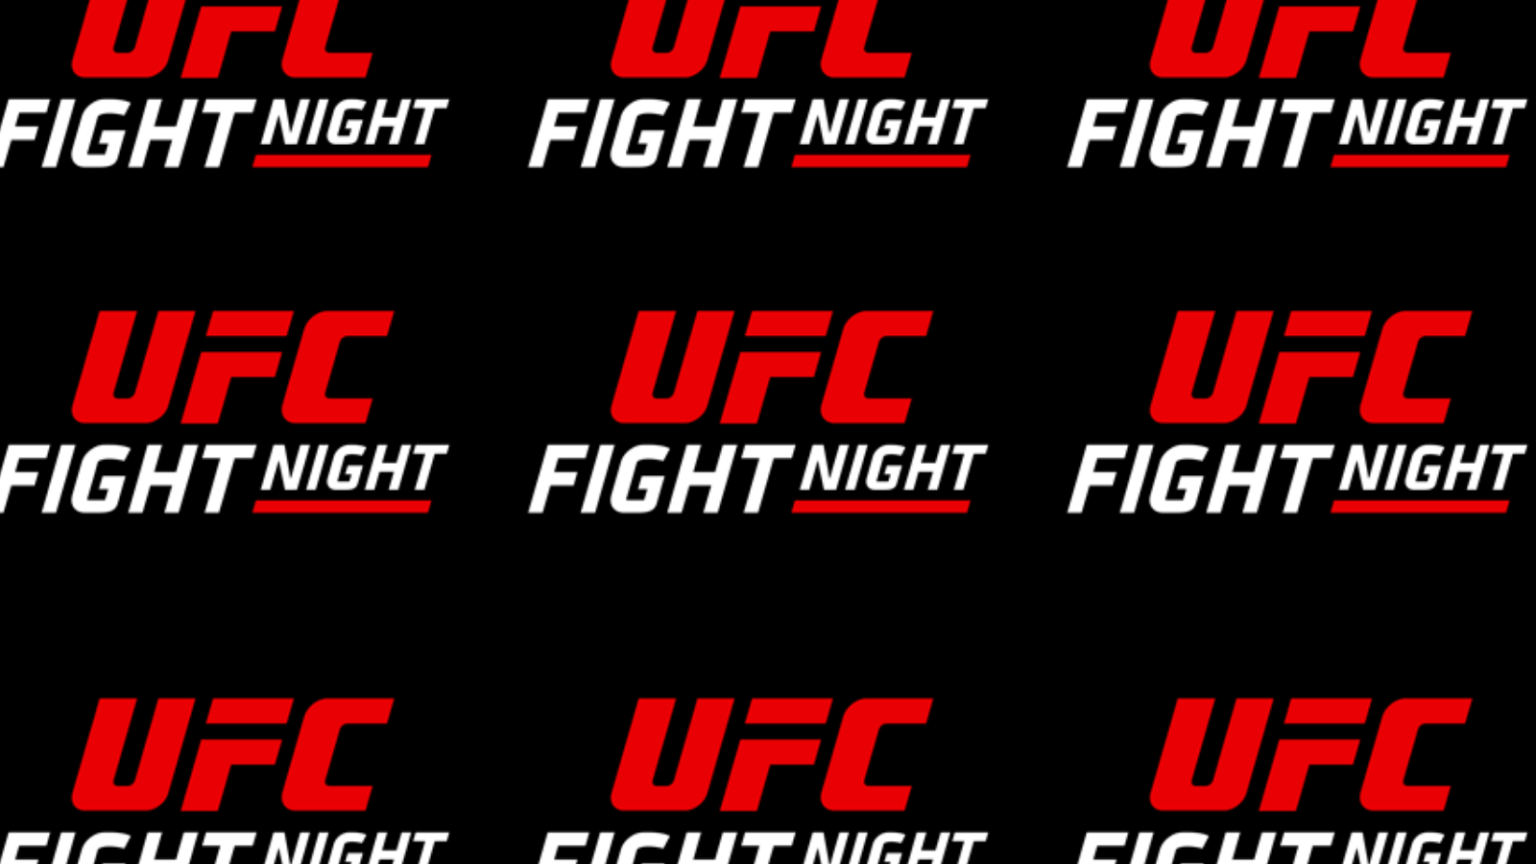 How to Watch 'UFC Fight Night' Online Live Stream Without Cable